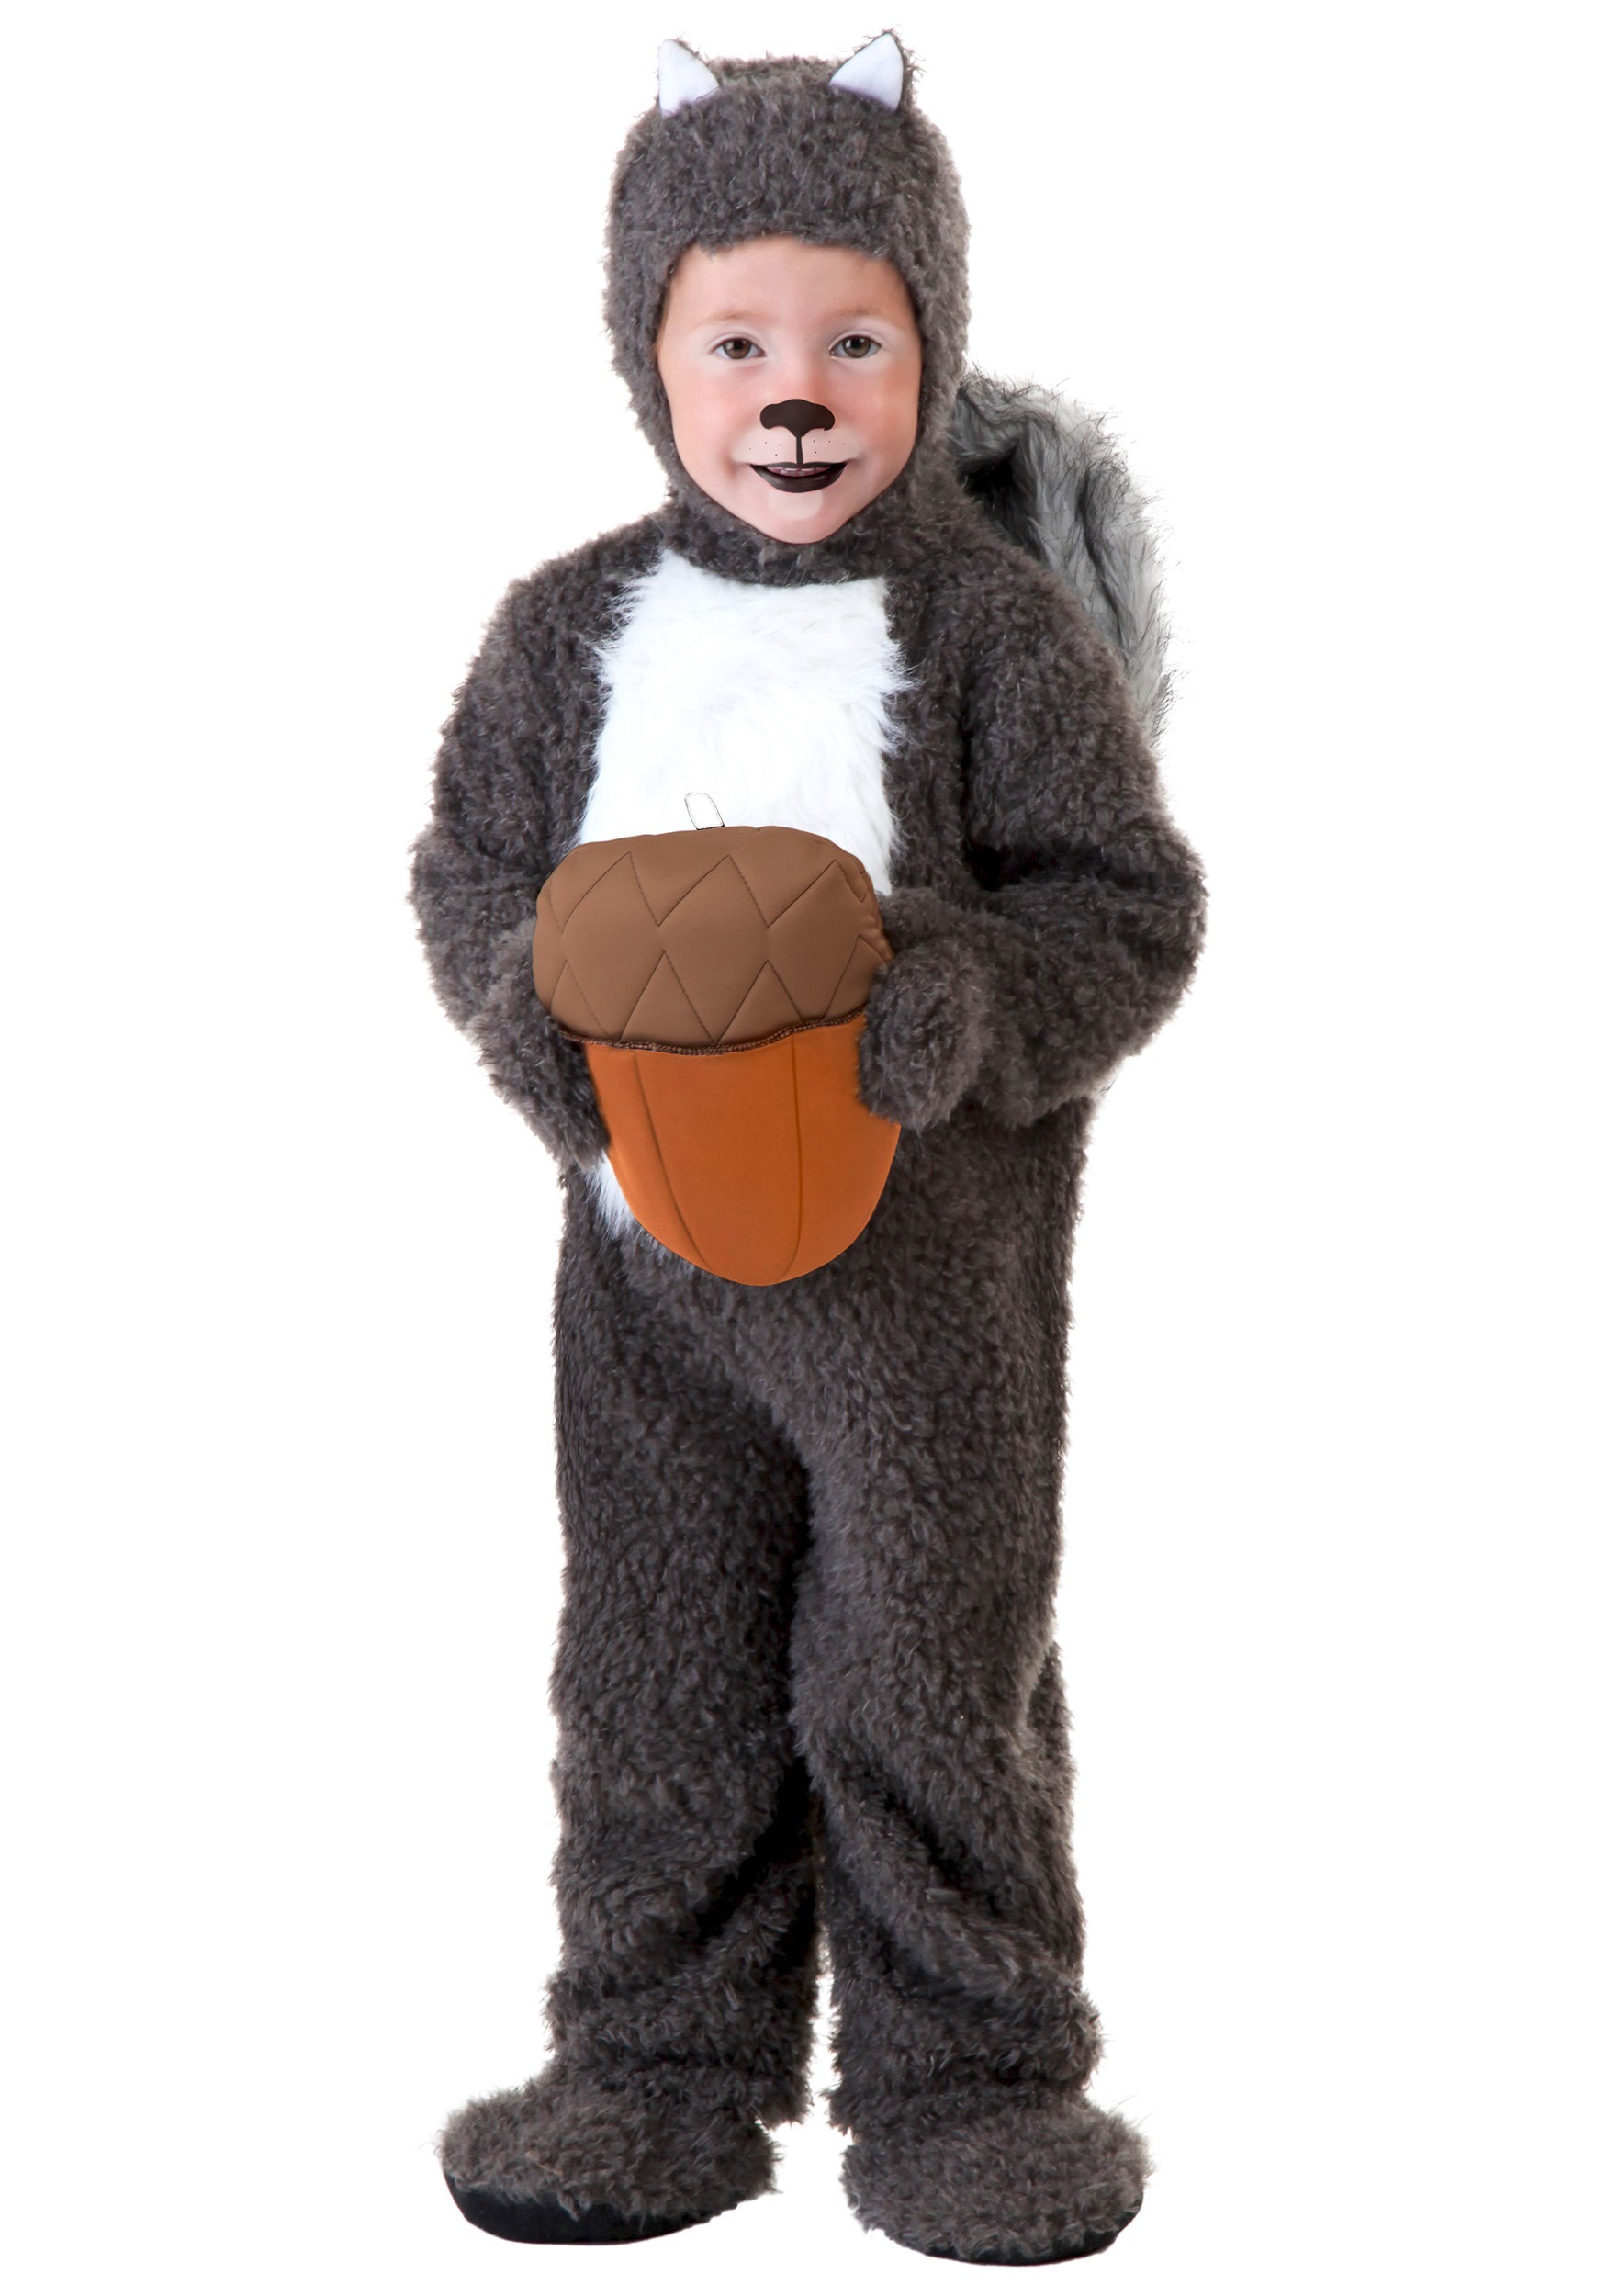 Photos - Fancy Dress Toddler FUN Costumes Squirrel Costume for Toddlers Gray FUN1309TD 